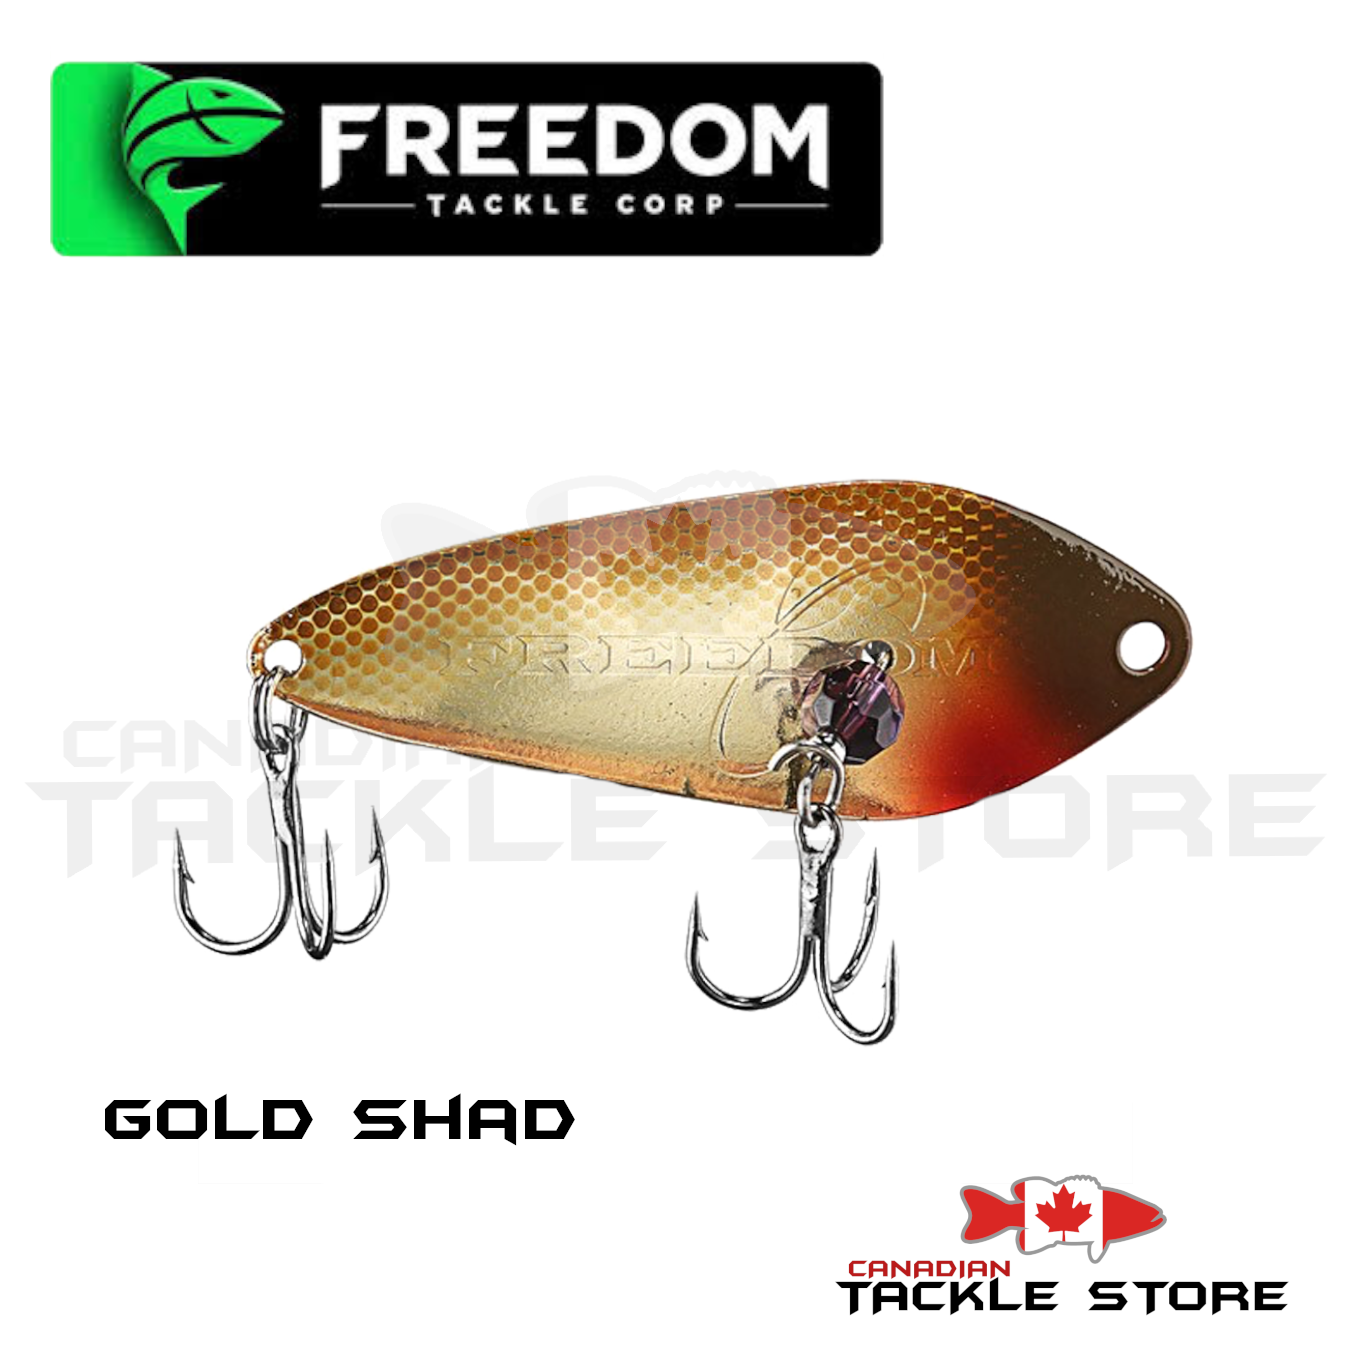 Freedom Tackle Minnow Spoon – Canadian Tackle Store